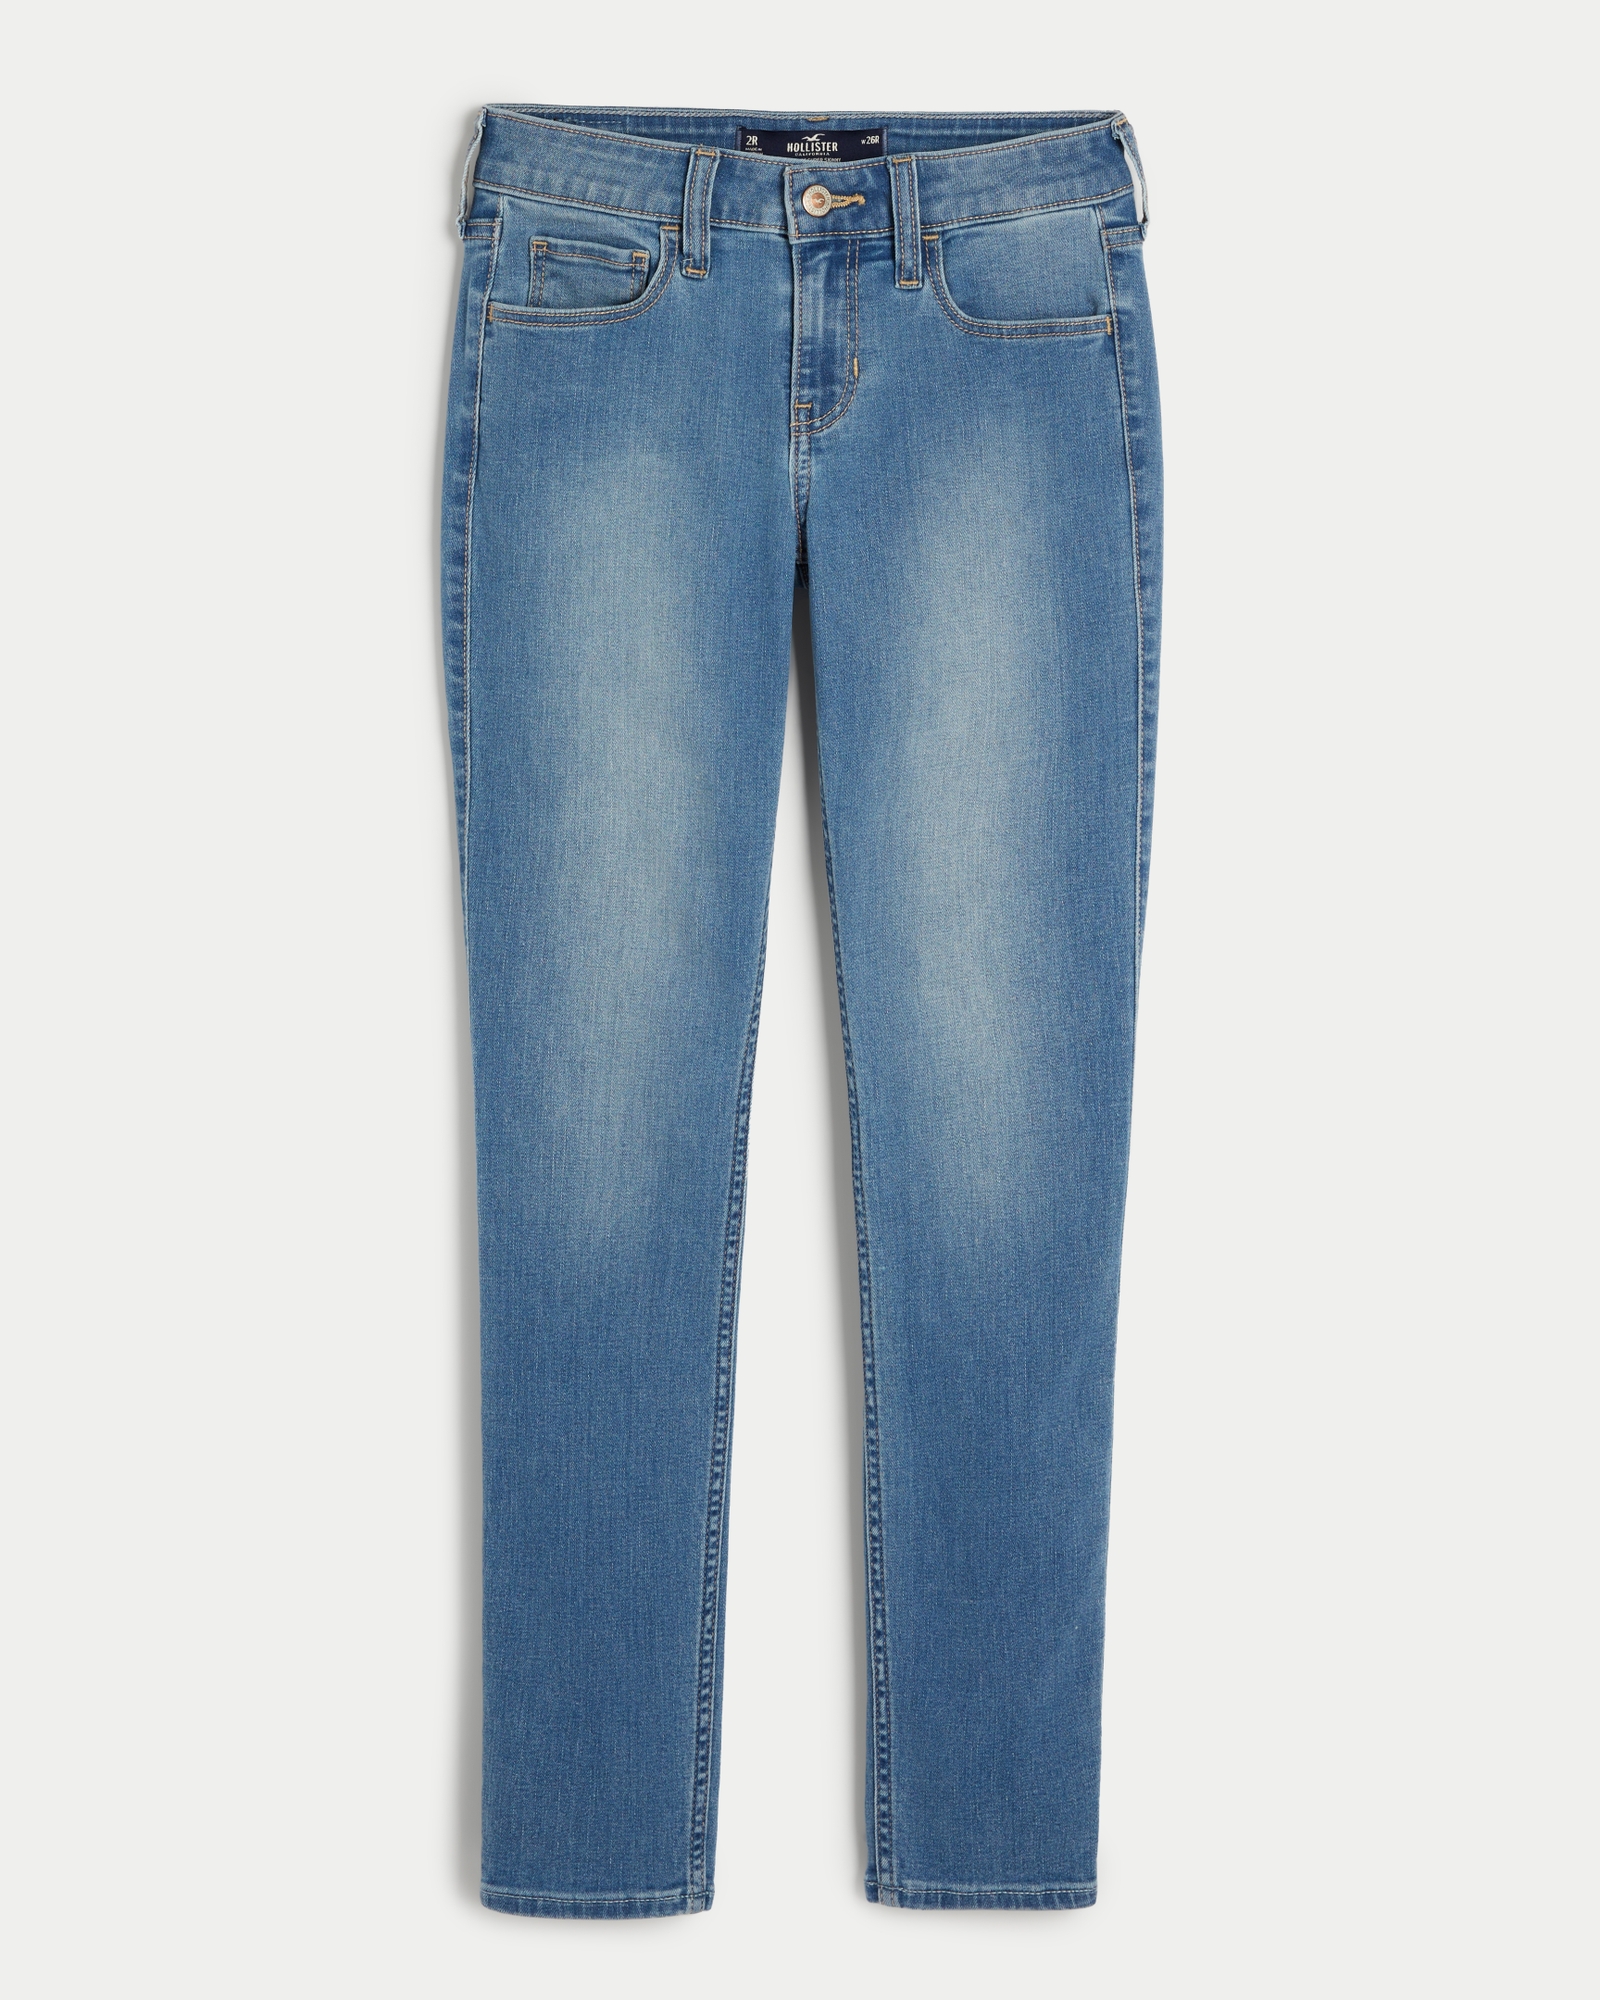 Hollister Women's Size 2 Blue Distressed Skinny Jeans – Treasures